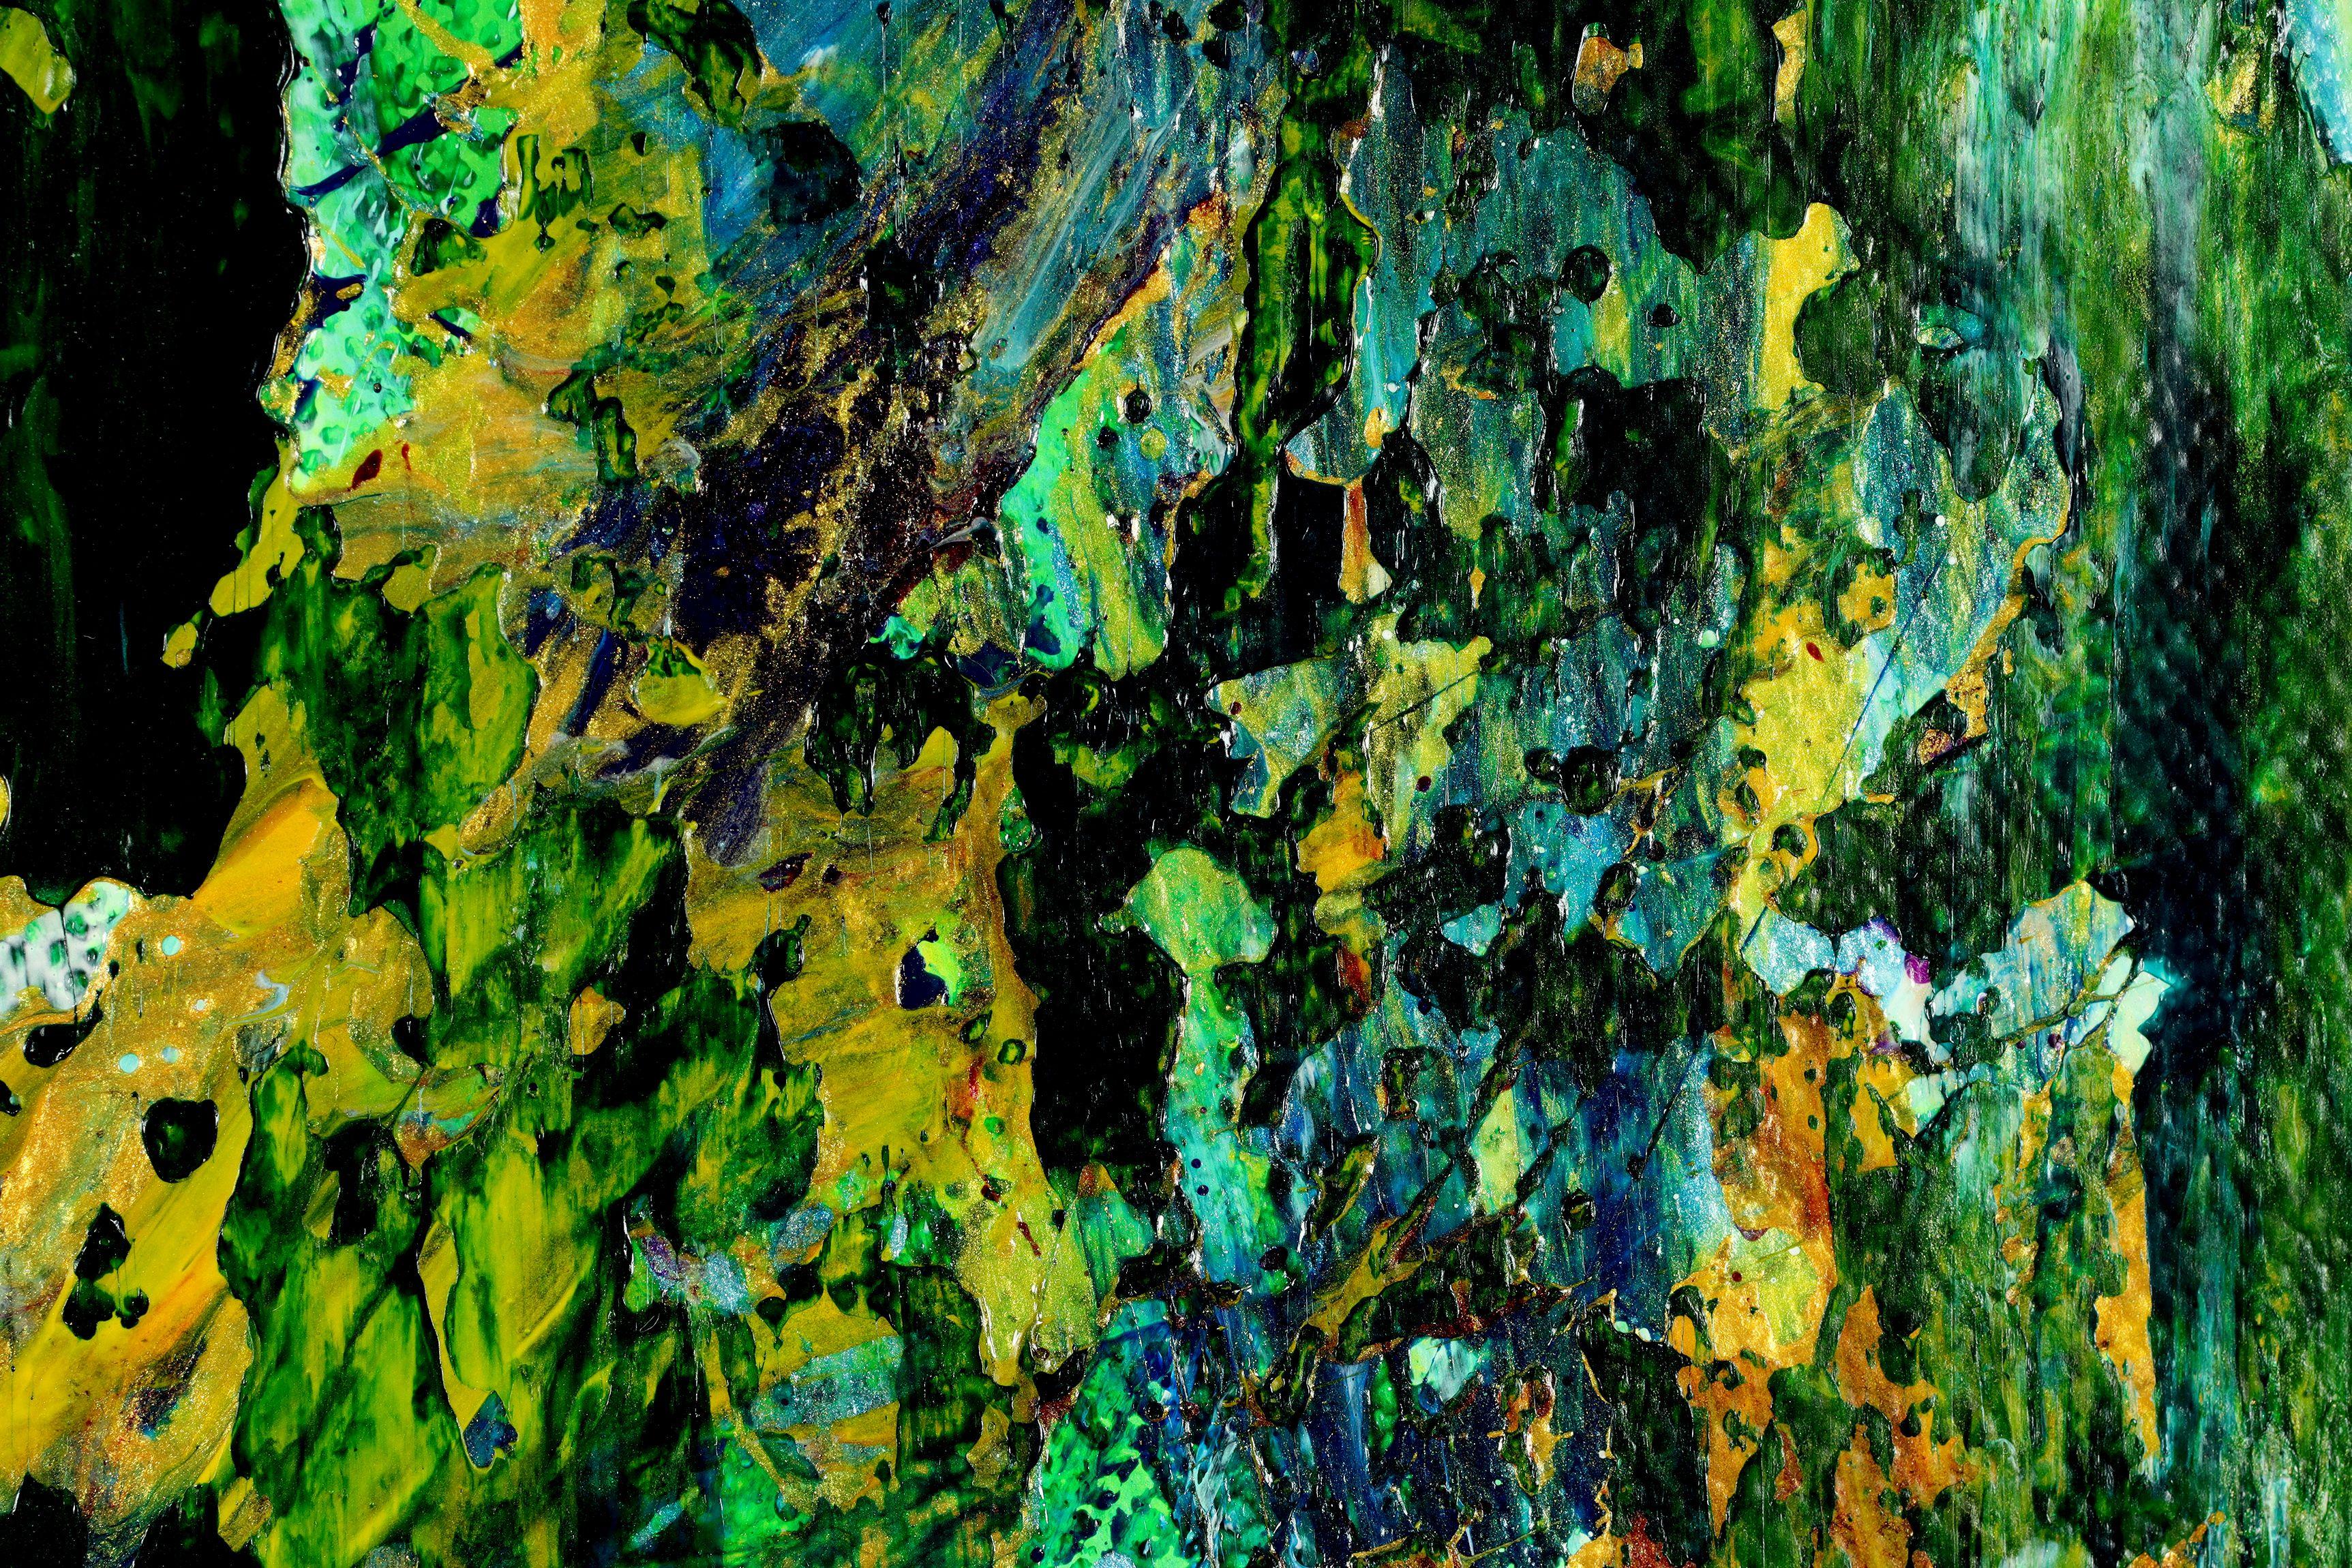 Inspired by nature forest painting with earthy color blending, contrast and details. Textured with layers of green, blue, turquoise, yellow.    This artwork its glossy with fine palette knife details. impactful abstract. Signed in front. Ready to